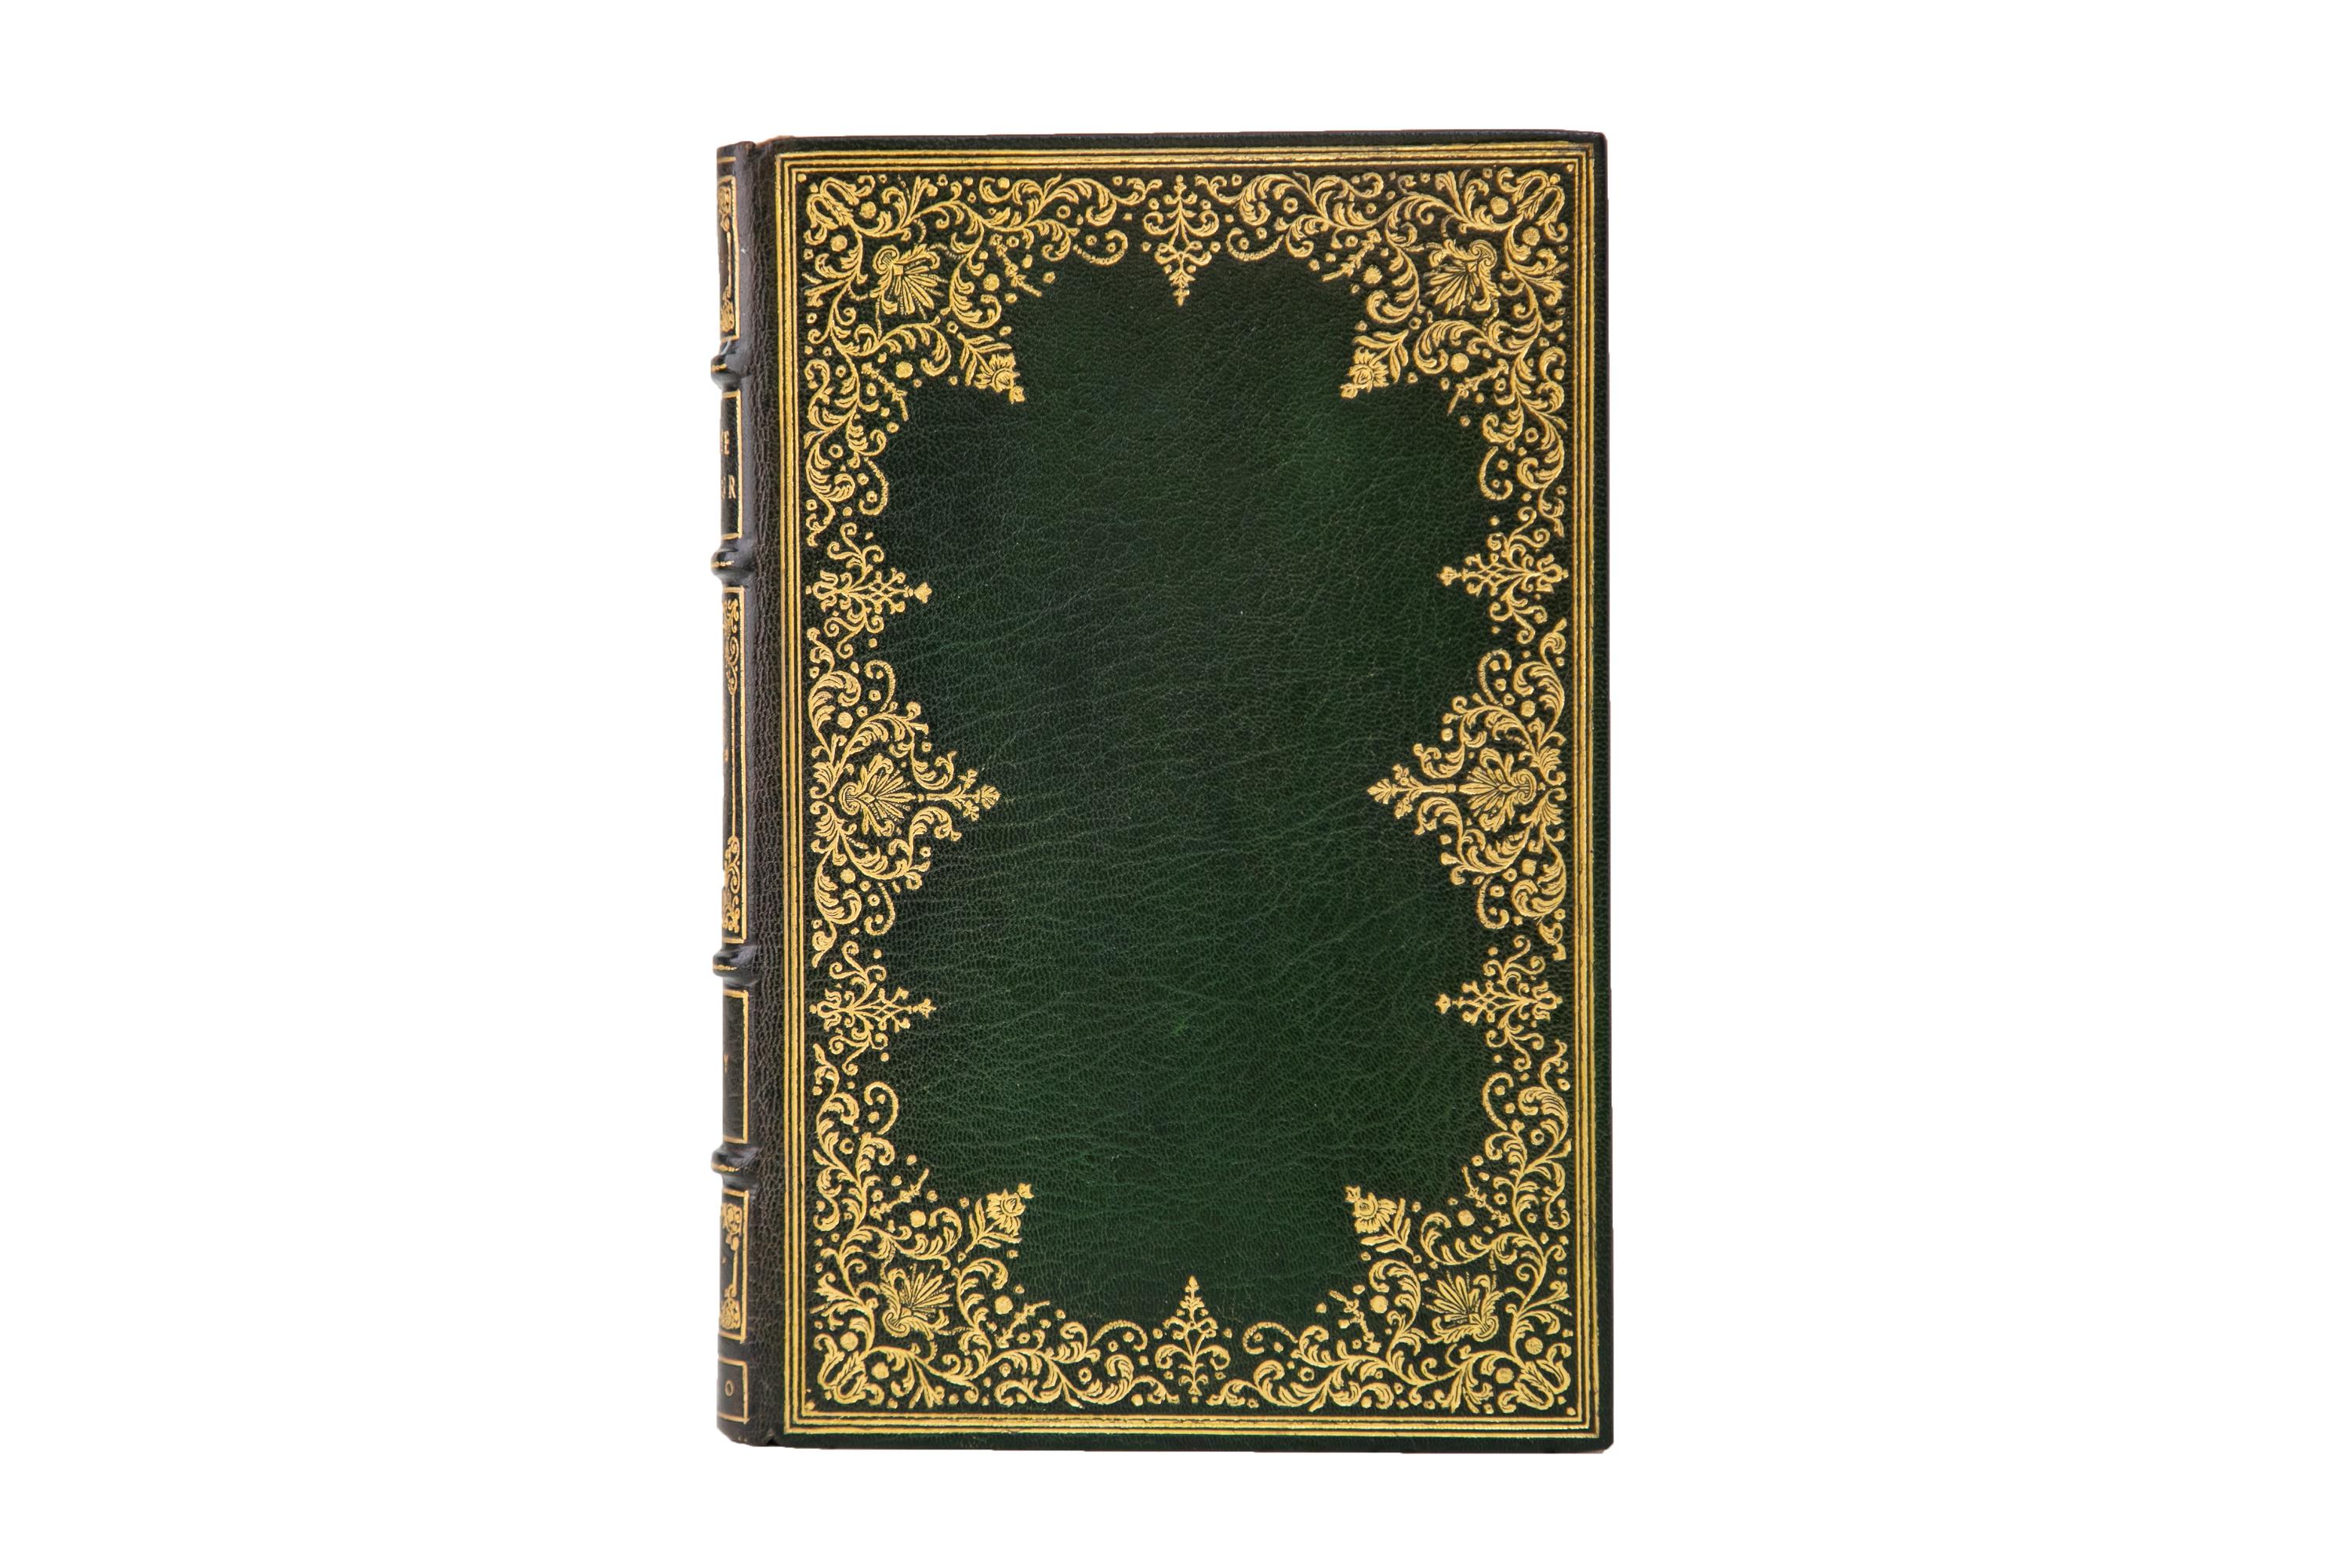 1 Volume. Sir Thomas Mallory, Le Morte D'Arthur. Bound by Stikeman in full green morocco with the cover displaying ornate gilt-tooled floral bordering. The spine displays raised bands, royal panel detailing, and label lettering, all gilt-tooled. The